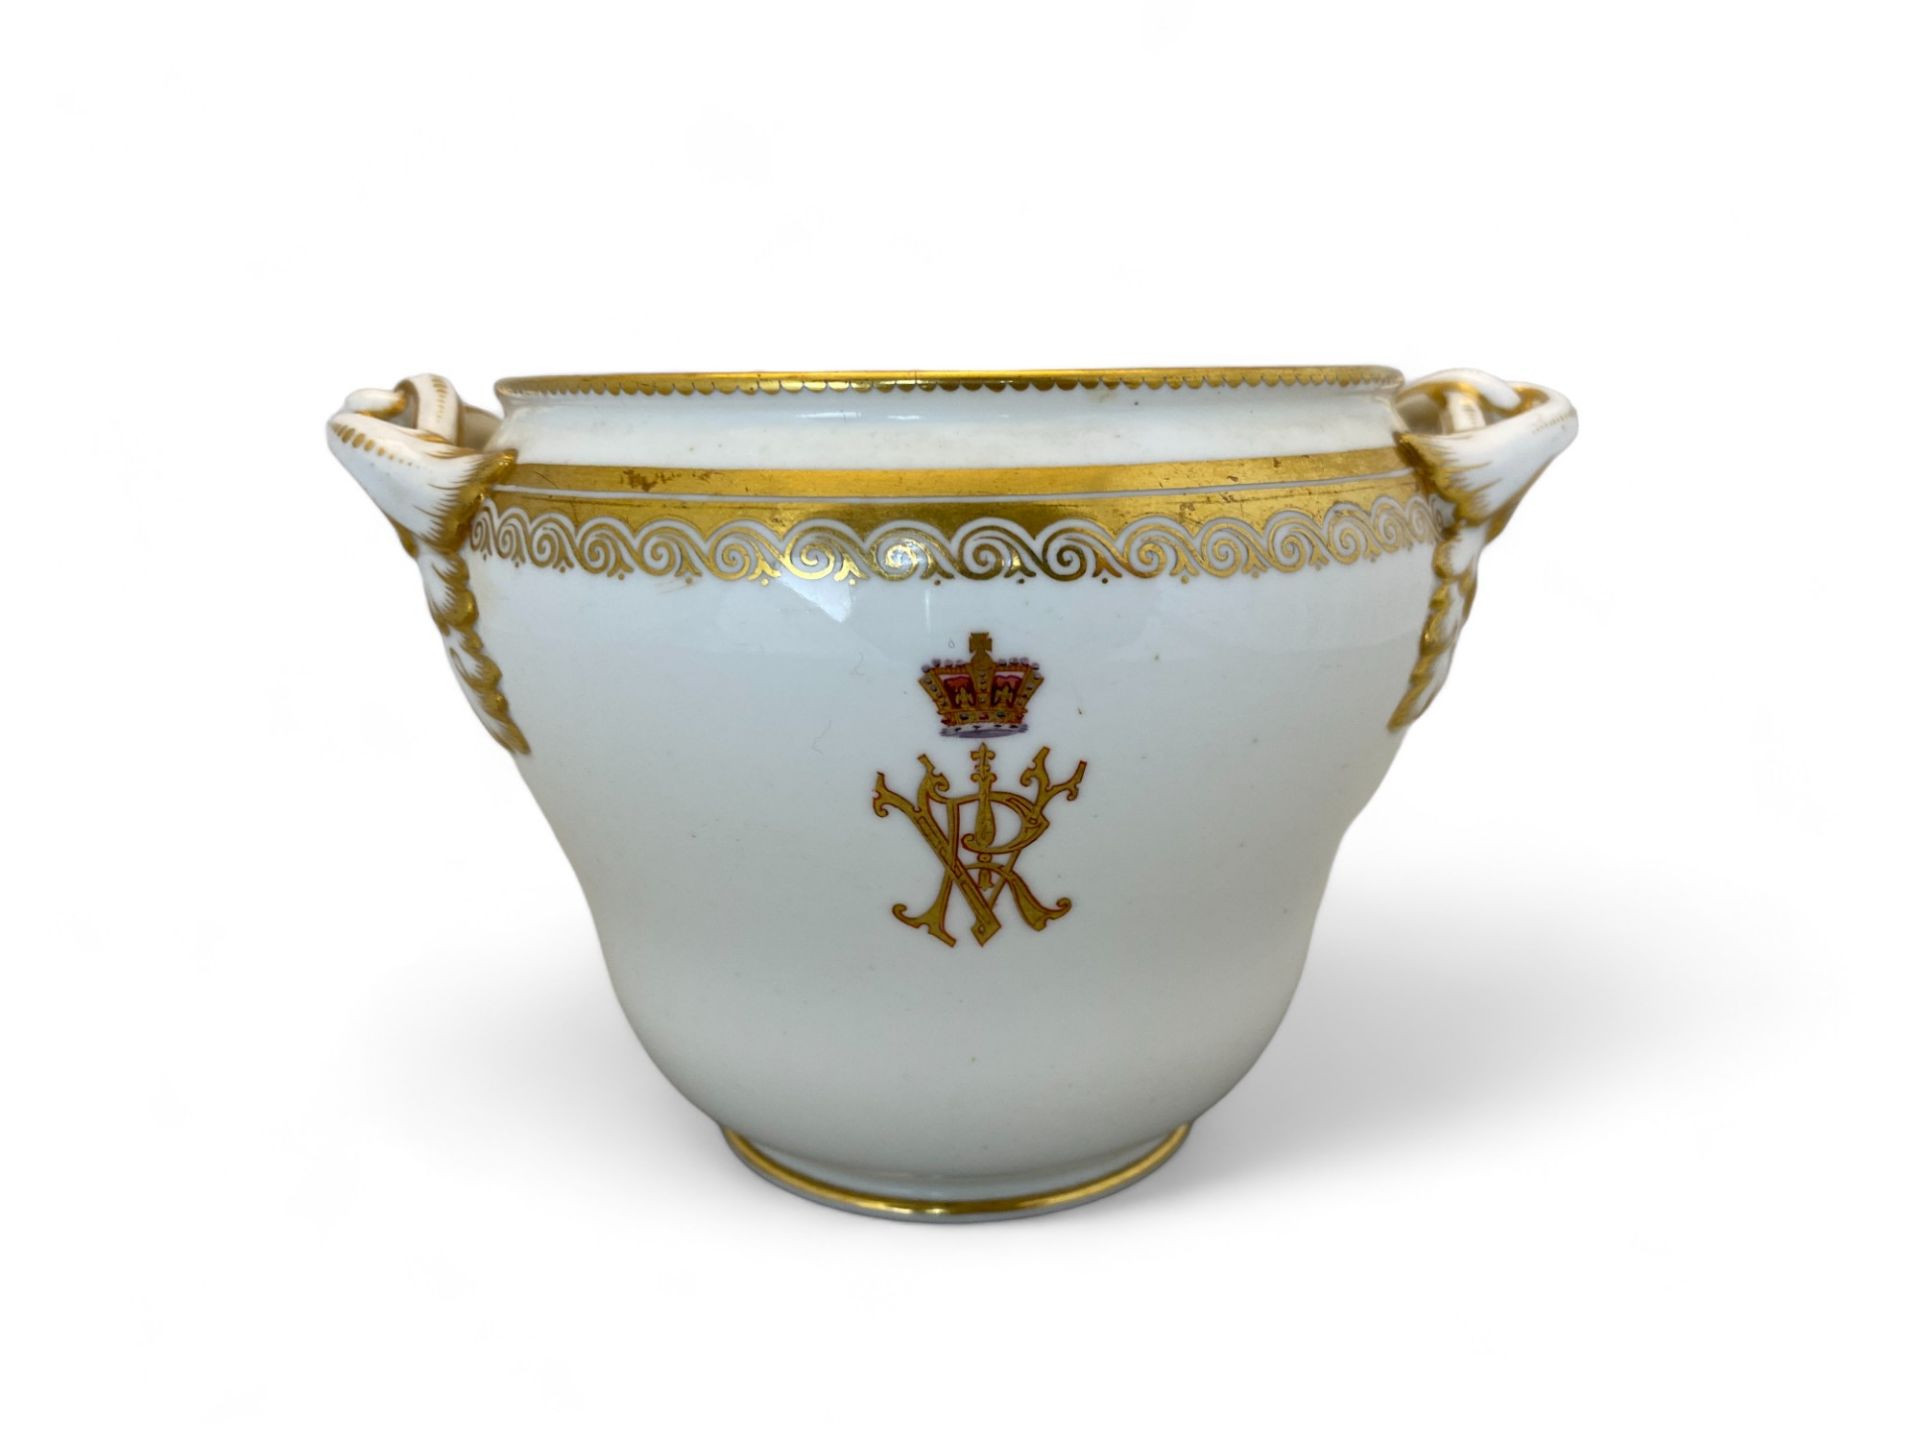 Of Royal Interest: A Mortlock China of Regent St white porcelain and gilt sugar bowl made for Queen - Image 3 of 7